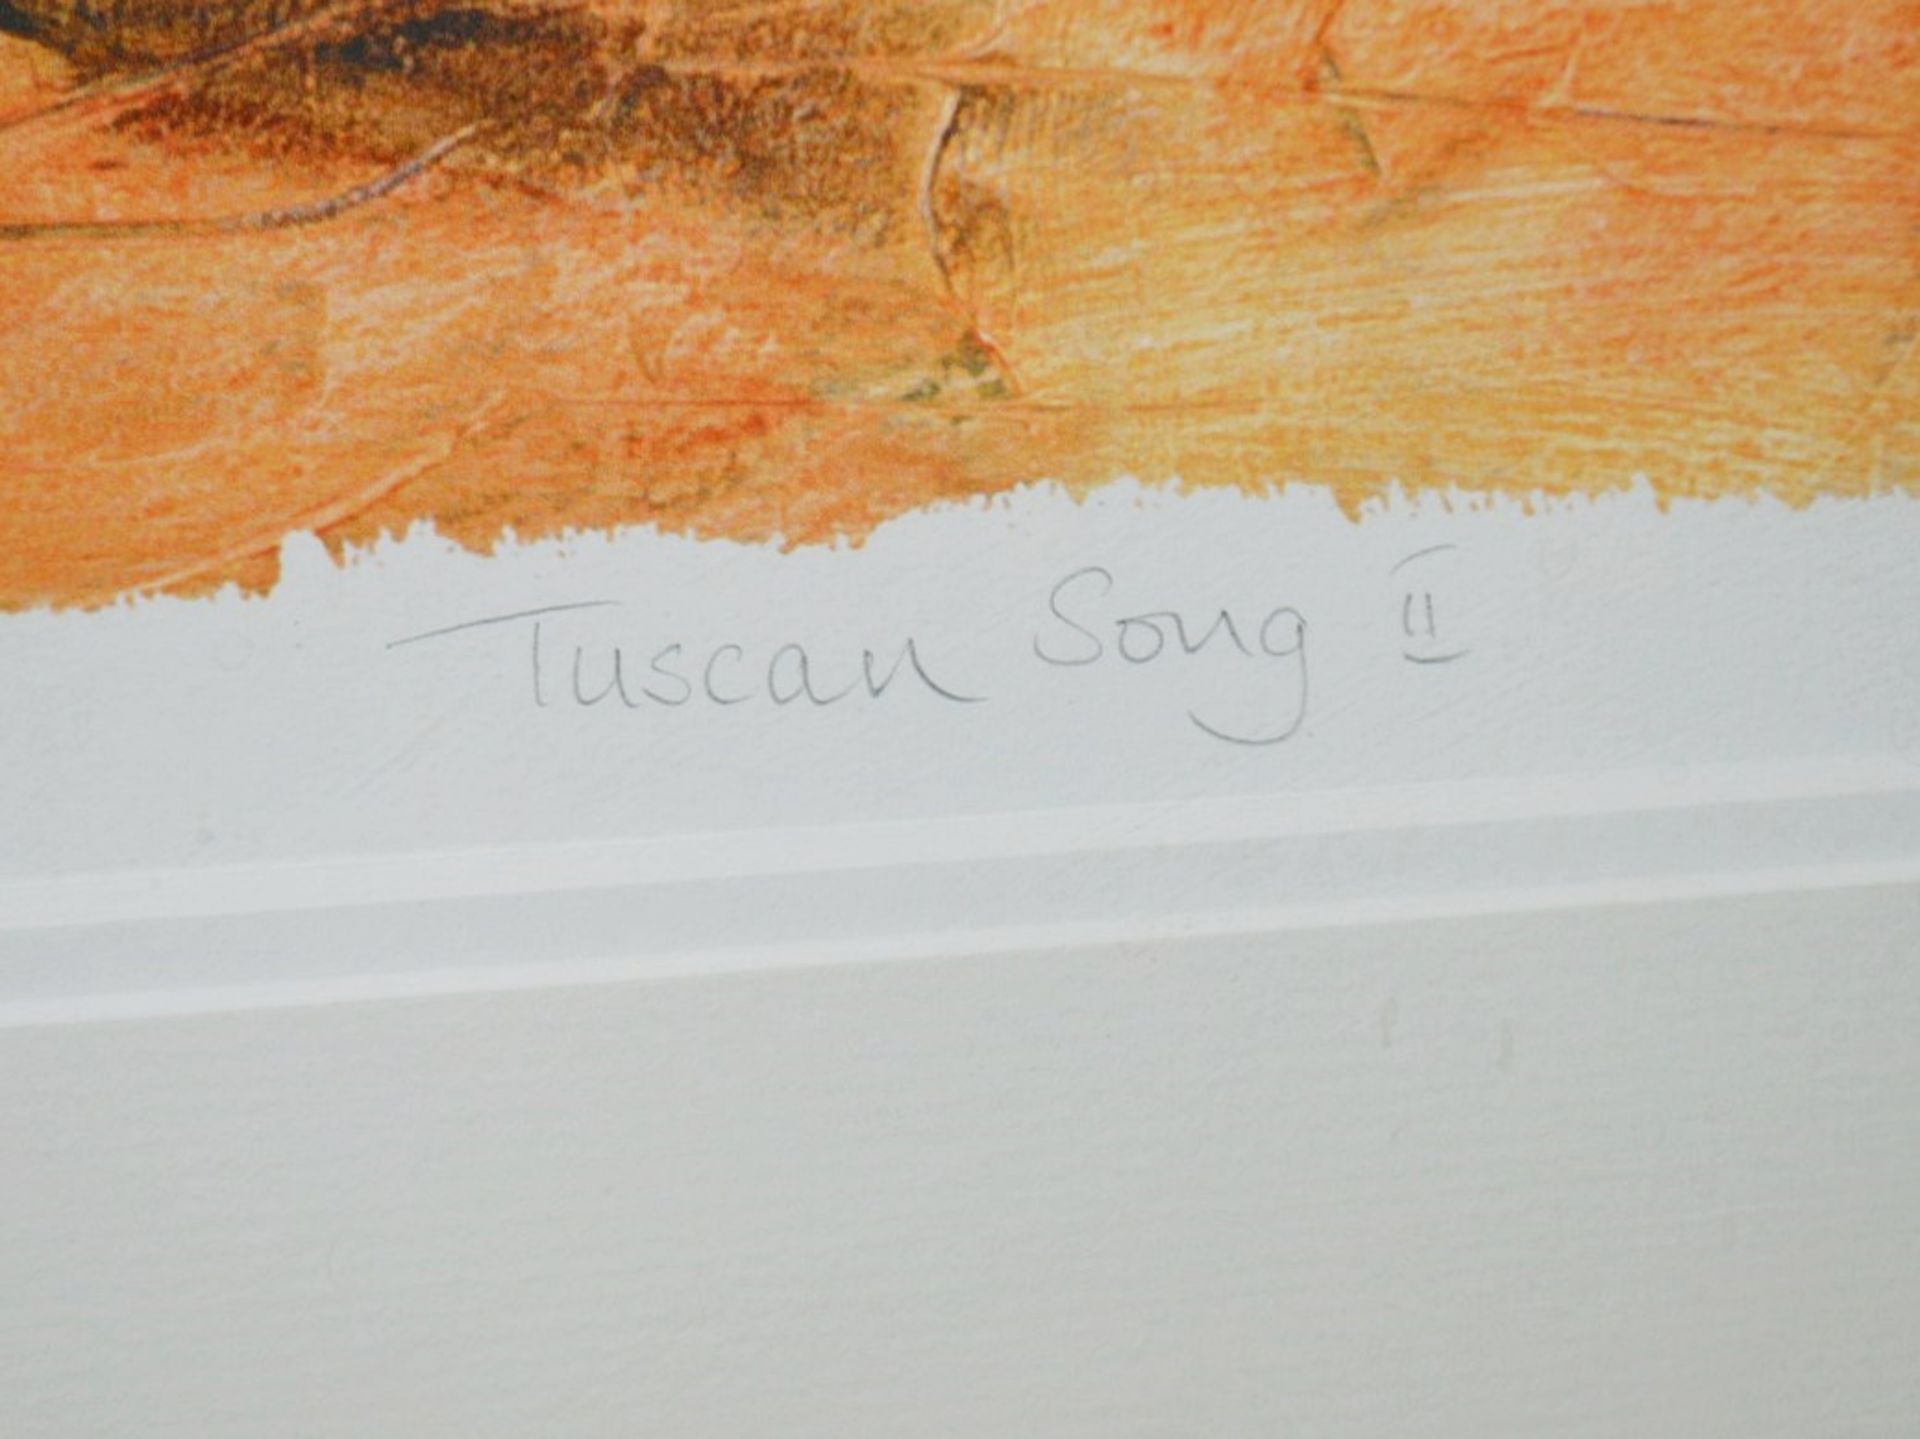 1 x Framed Limited Edition Art Print 'Tuscan Song II' By RICHARD PARGETER - Signed And Mounted - - Image 6 of 6